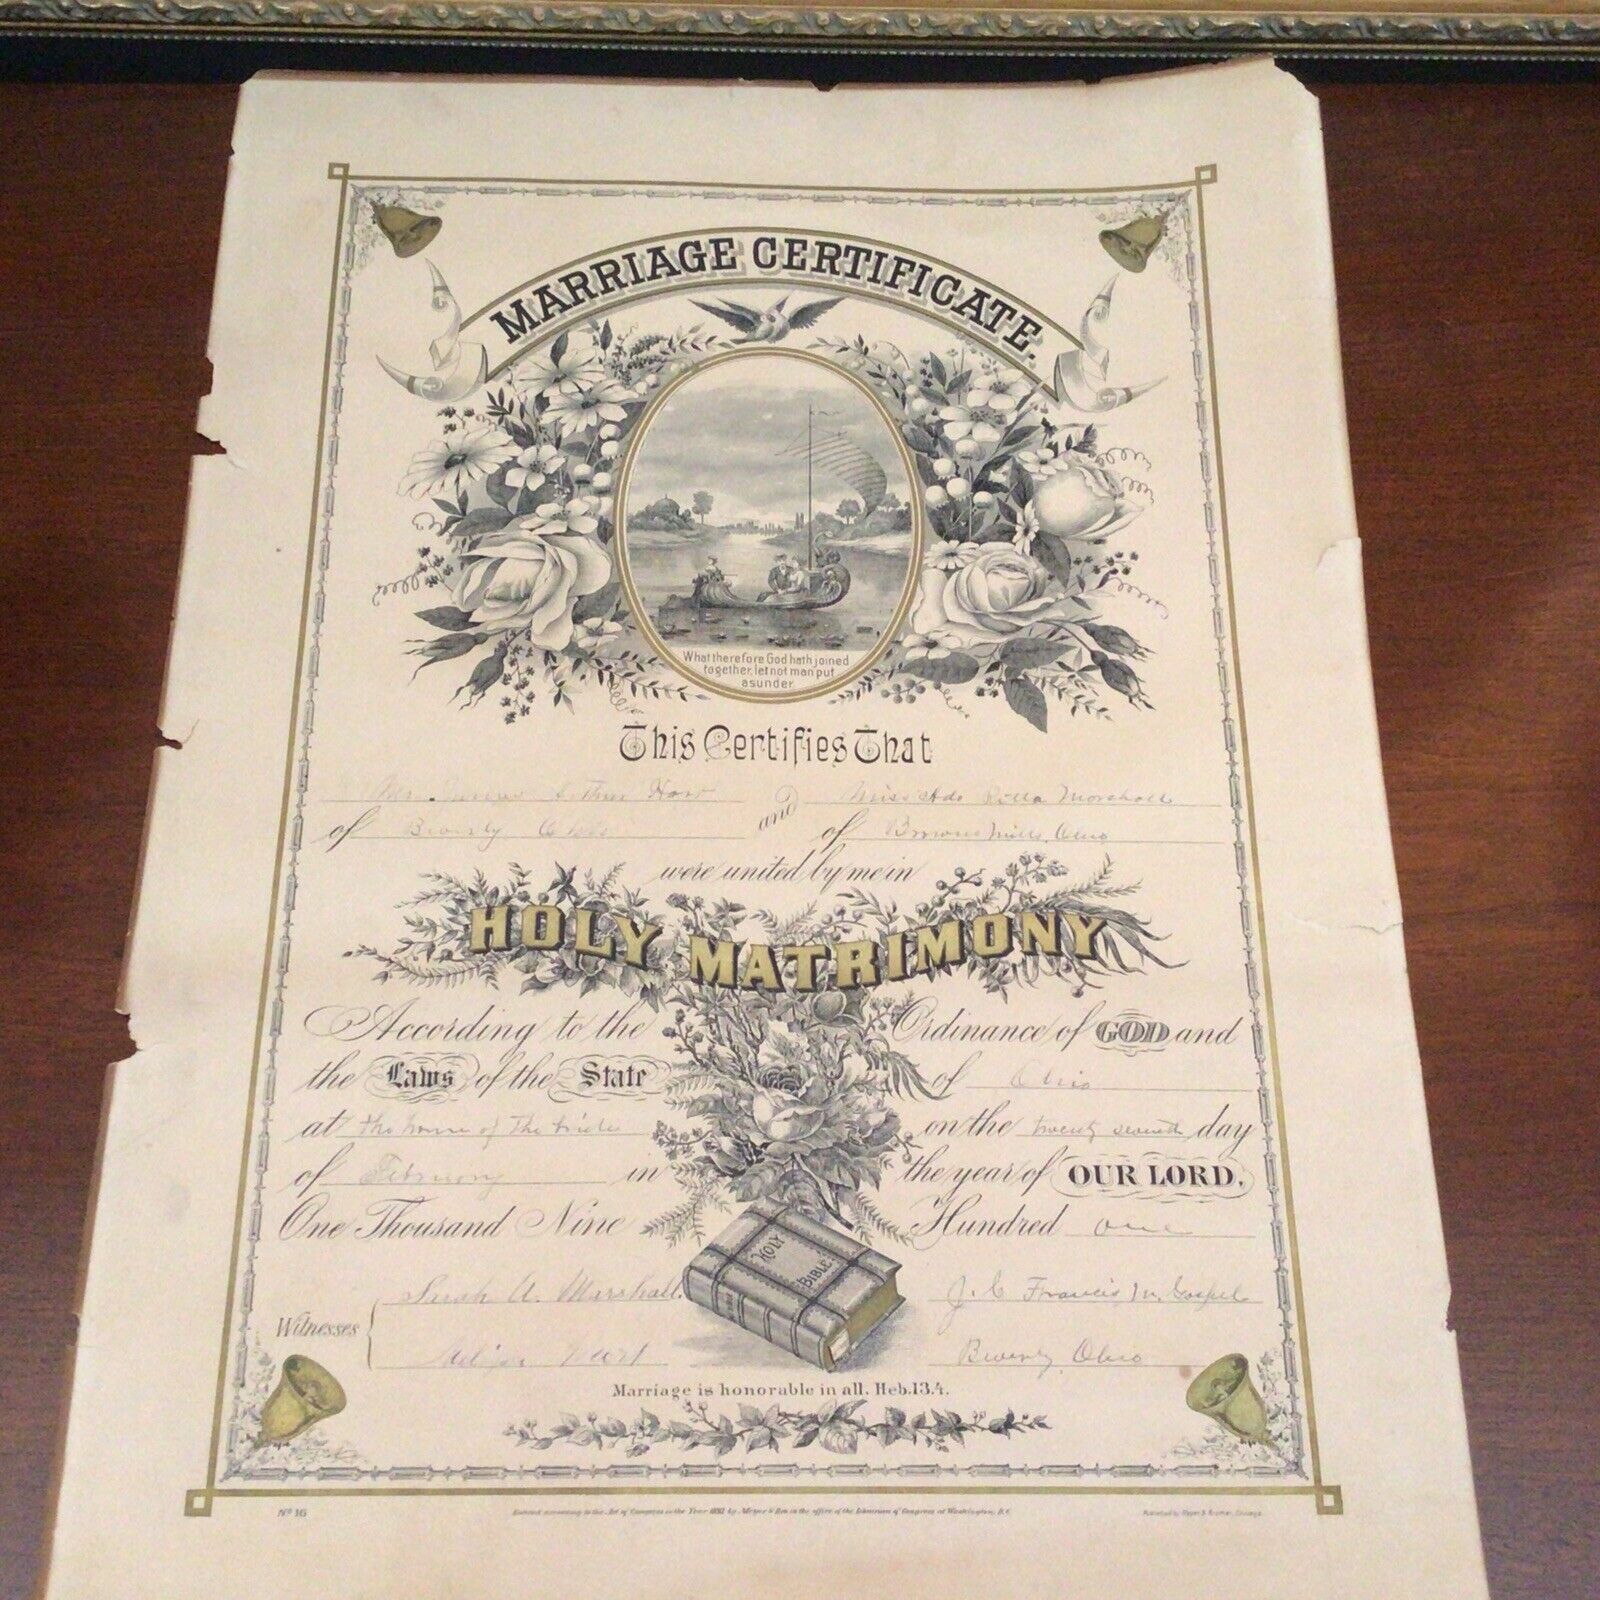 ATQ. Marriage Certificate ,Nov. 27, 1901, Beverly Ohio,at “home of the bride”.